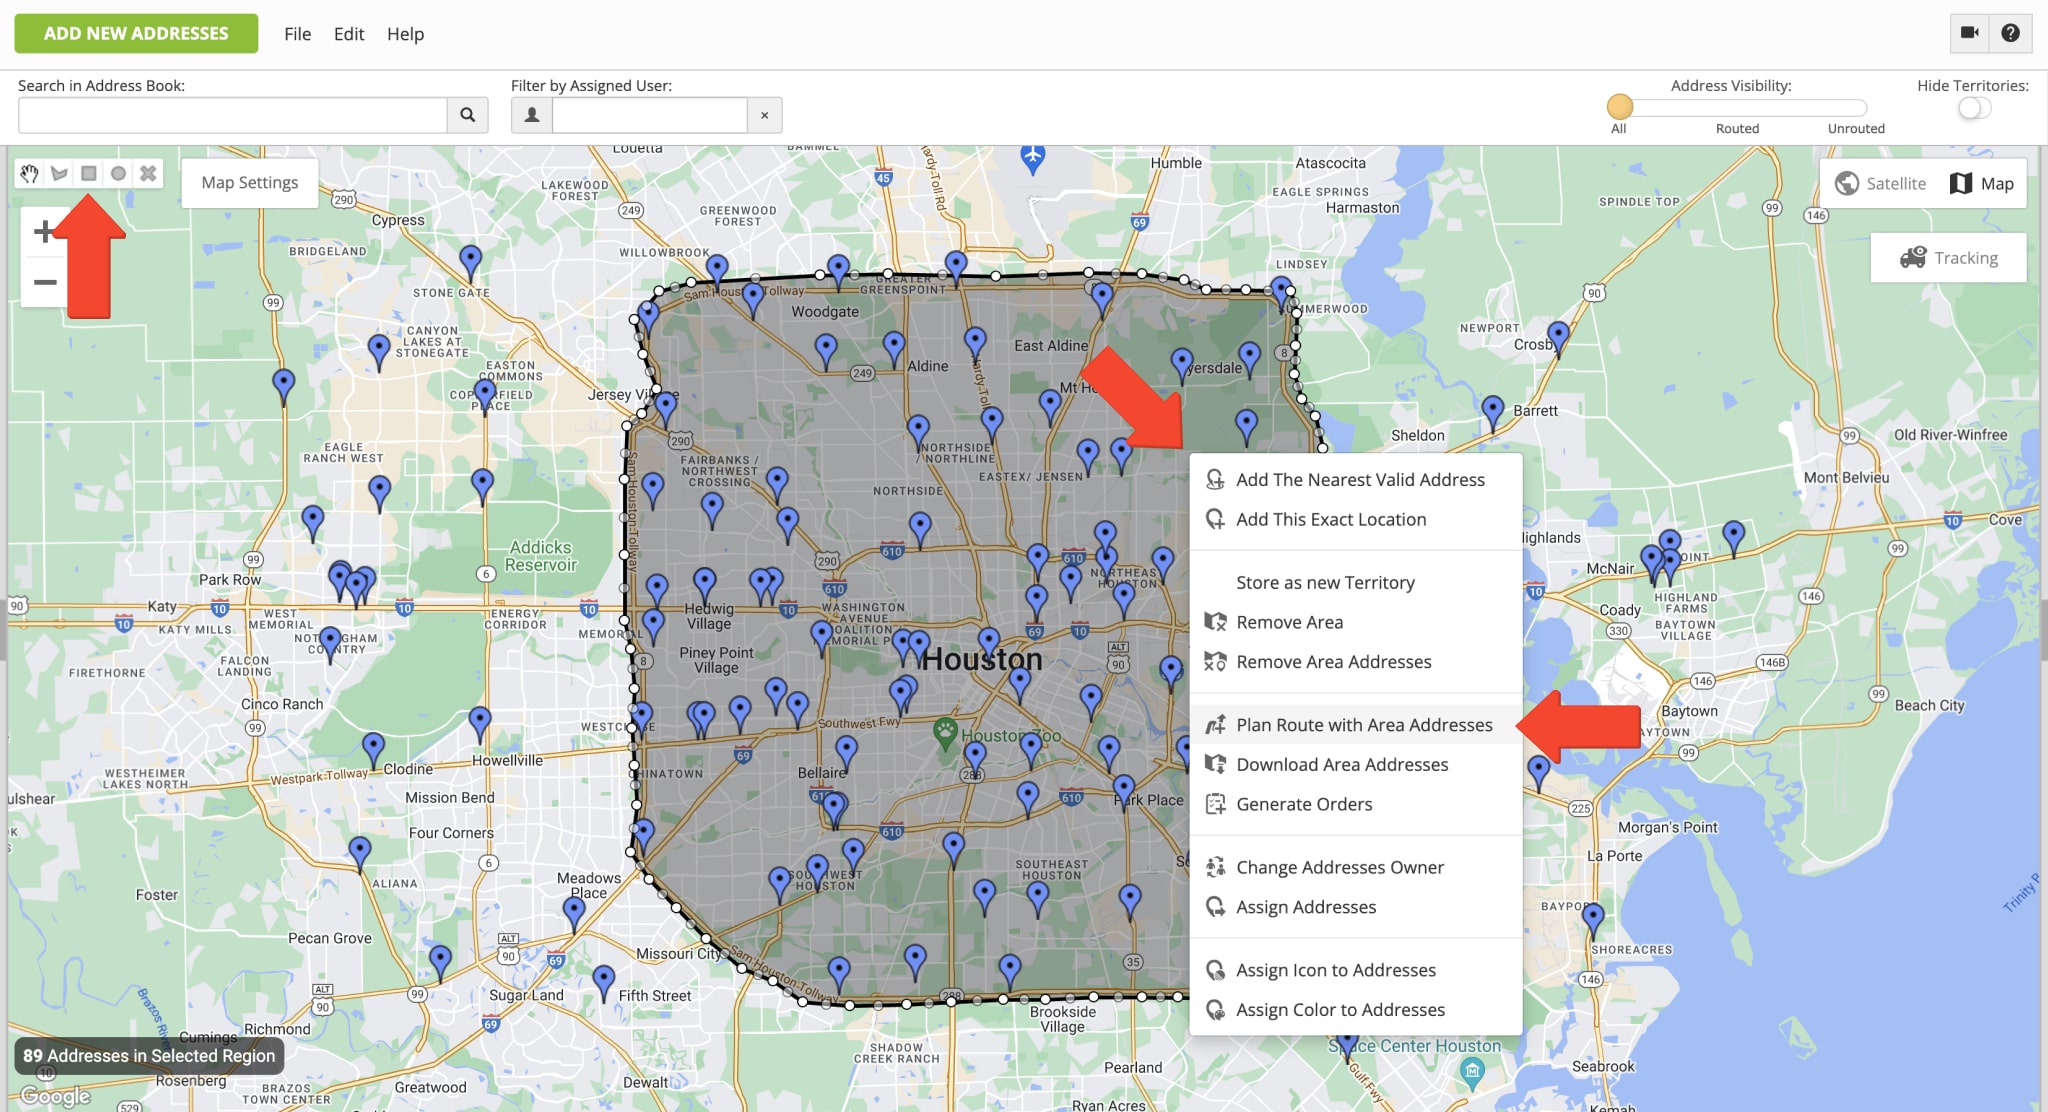 Select addresses on the interactive map to plan and optimize last mile routes for delivery, field service, sales, etc.